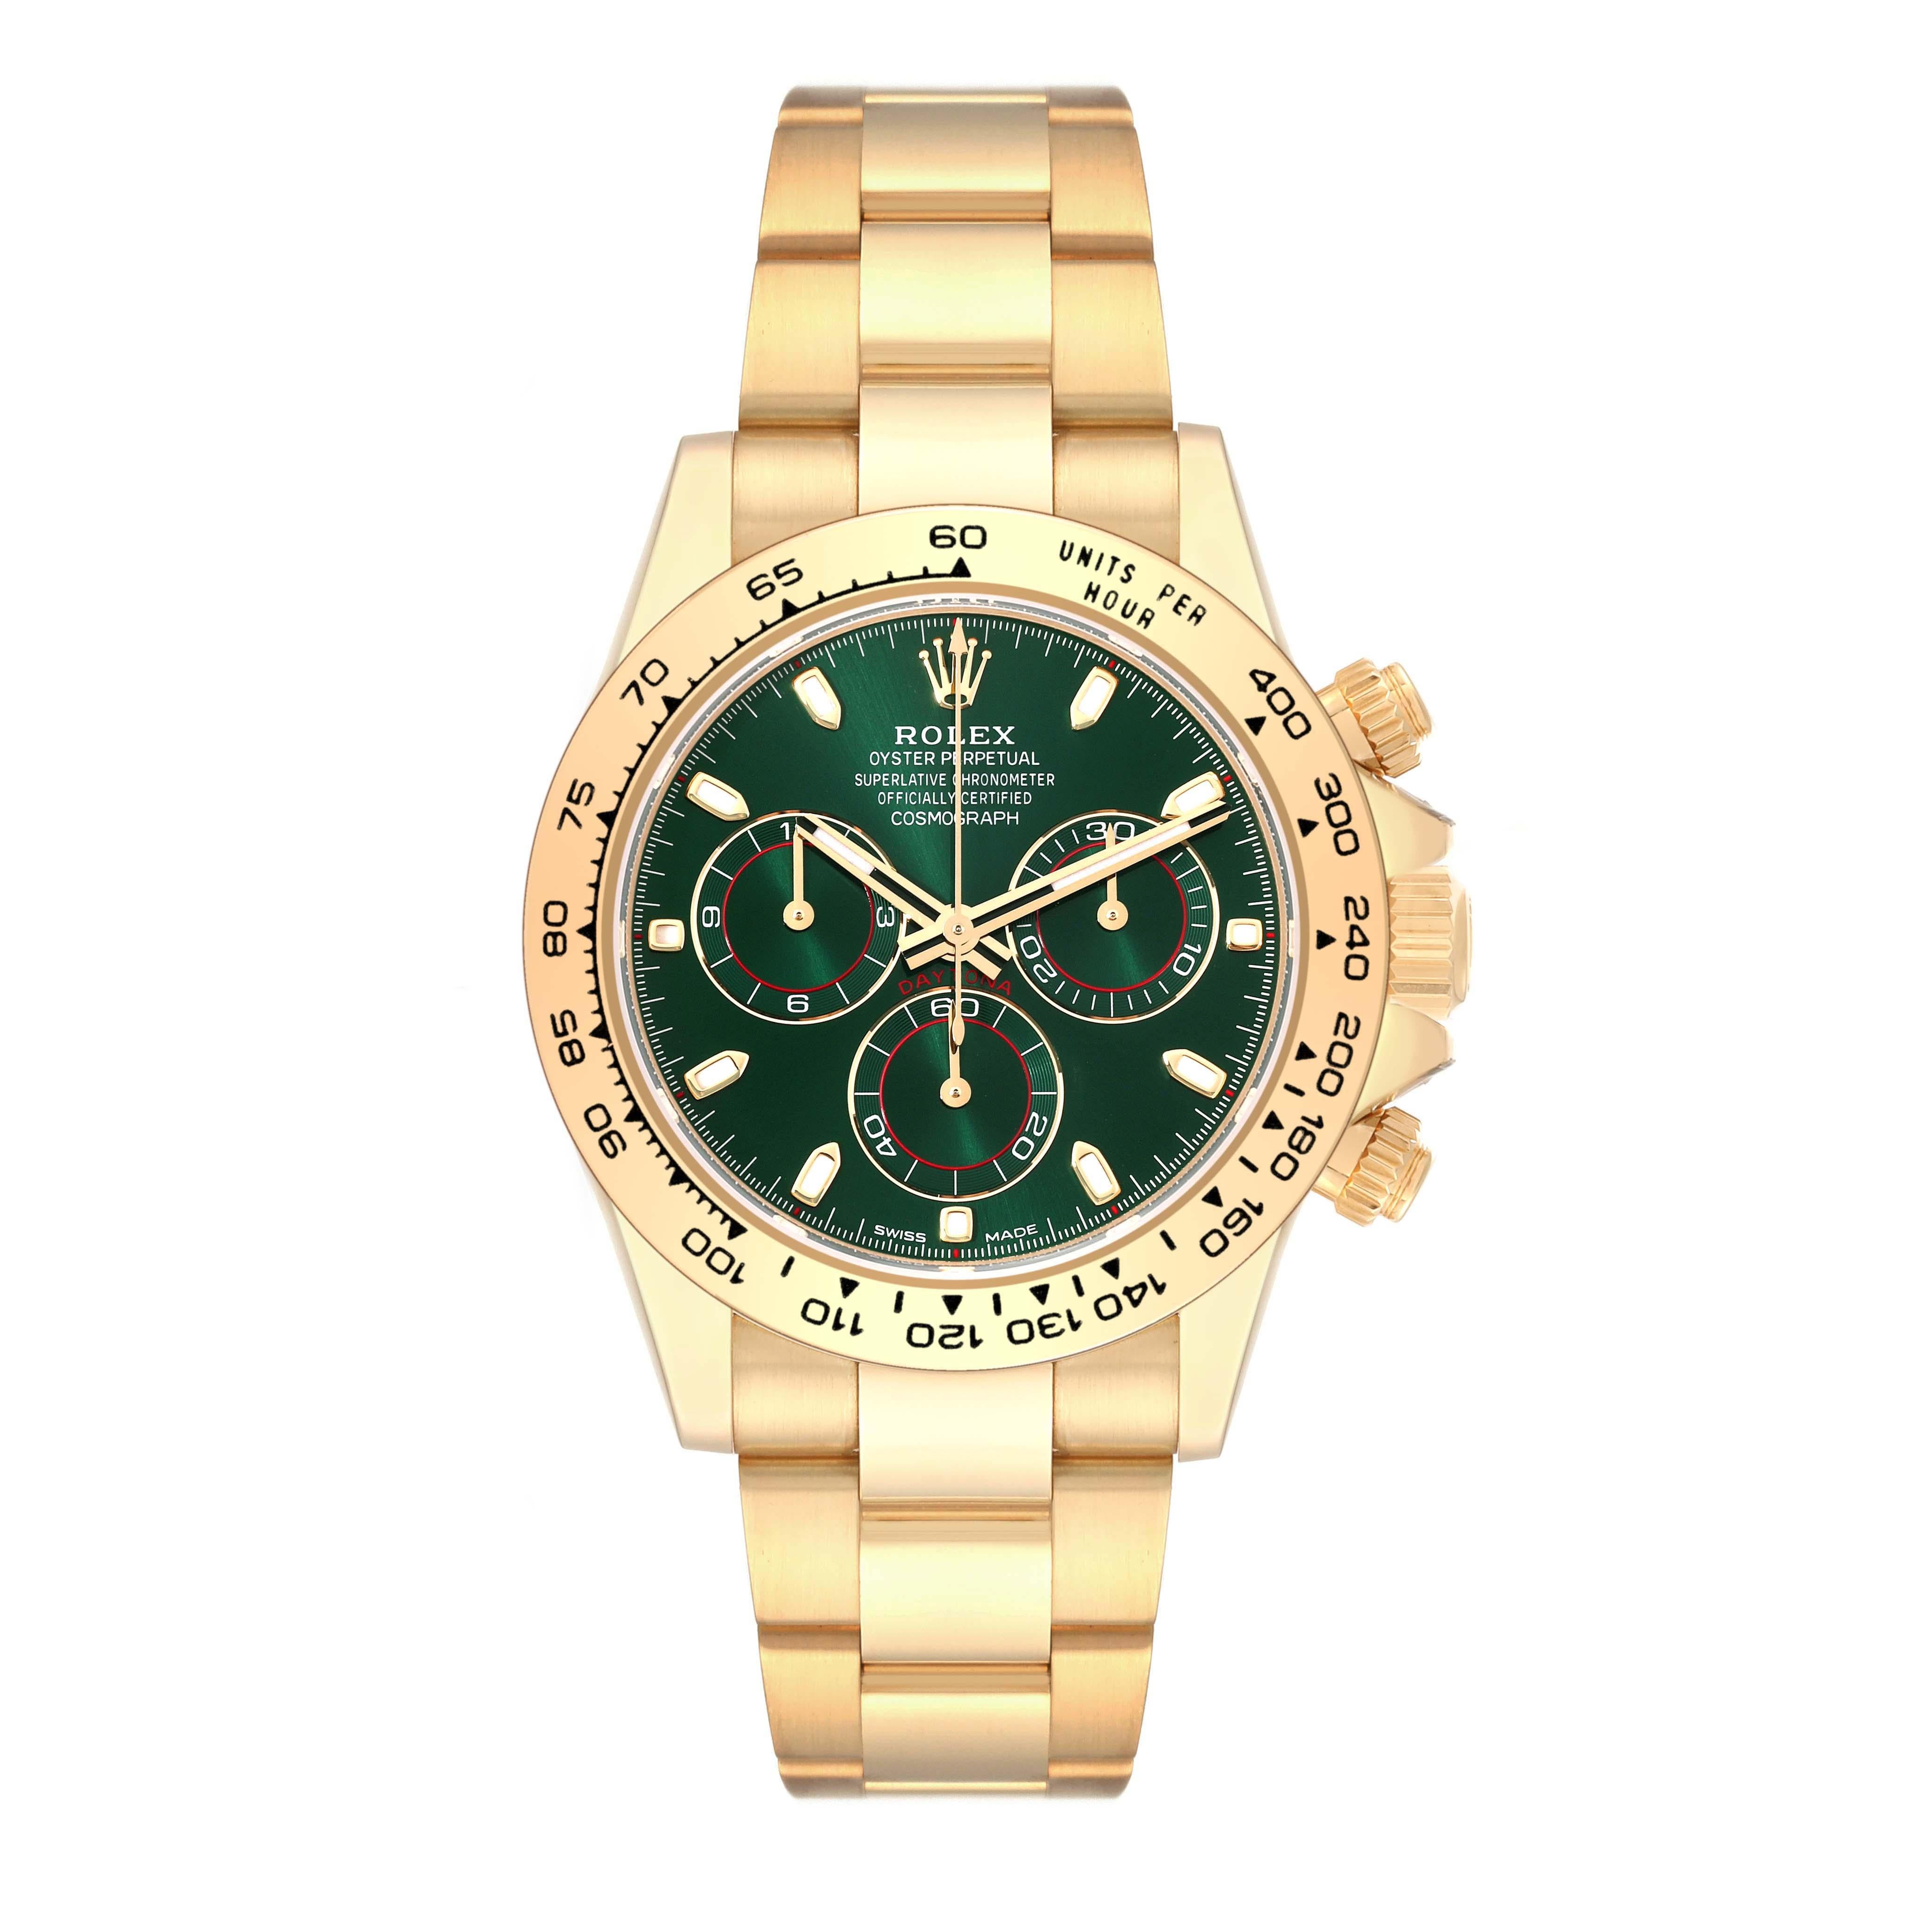 Rolex Daytona 18k Yellow Gold Green Dial Mens Watch 116508 Box Card. Officially certified chronometer self-winding movement. Rhodium-plated, 44 jewels, straight line lever escapement, monometallic balance adjusted to temperatures and 5 positions,